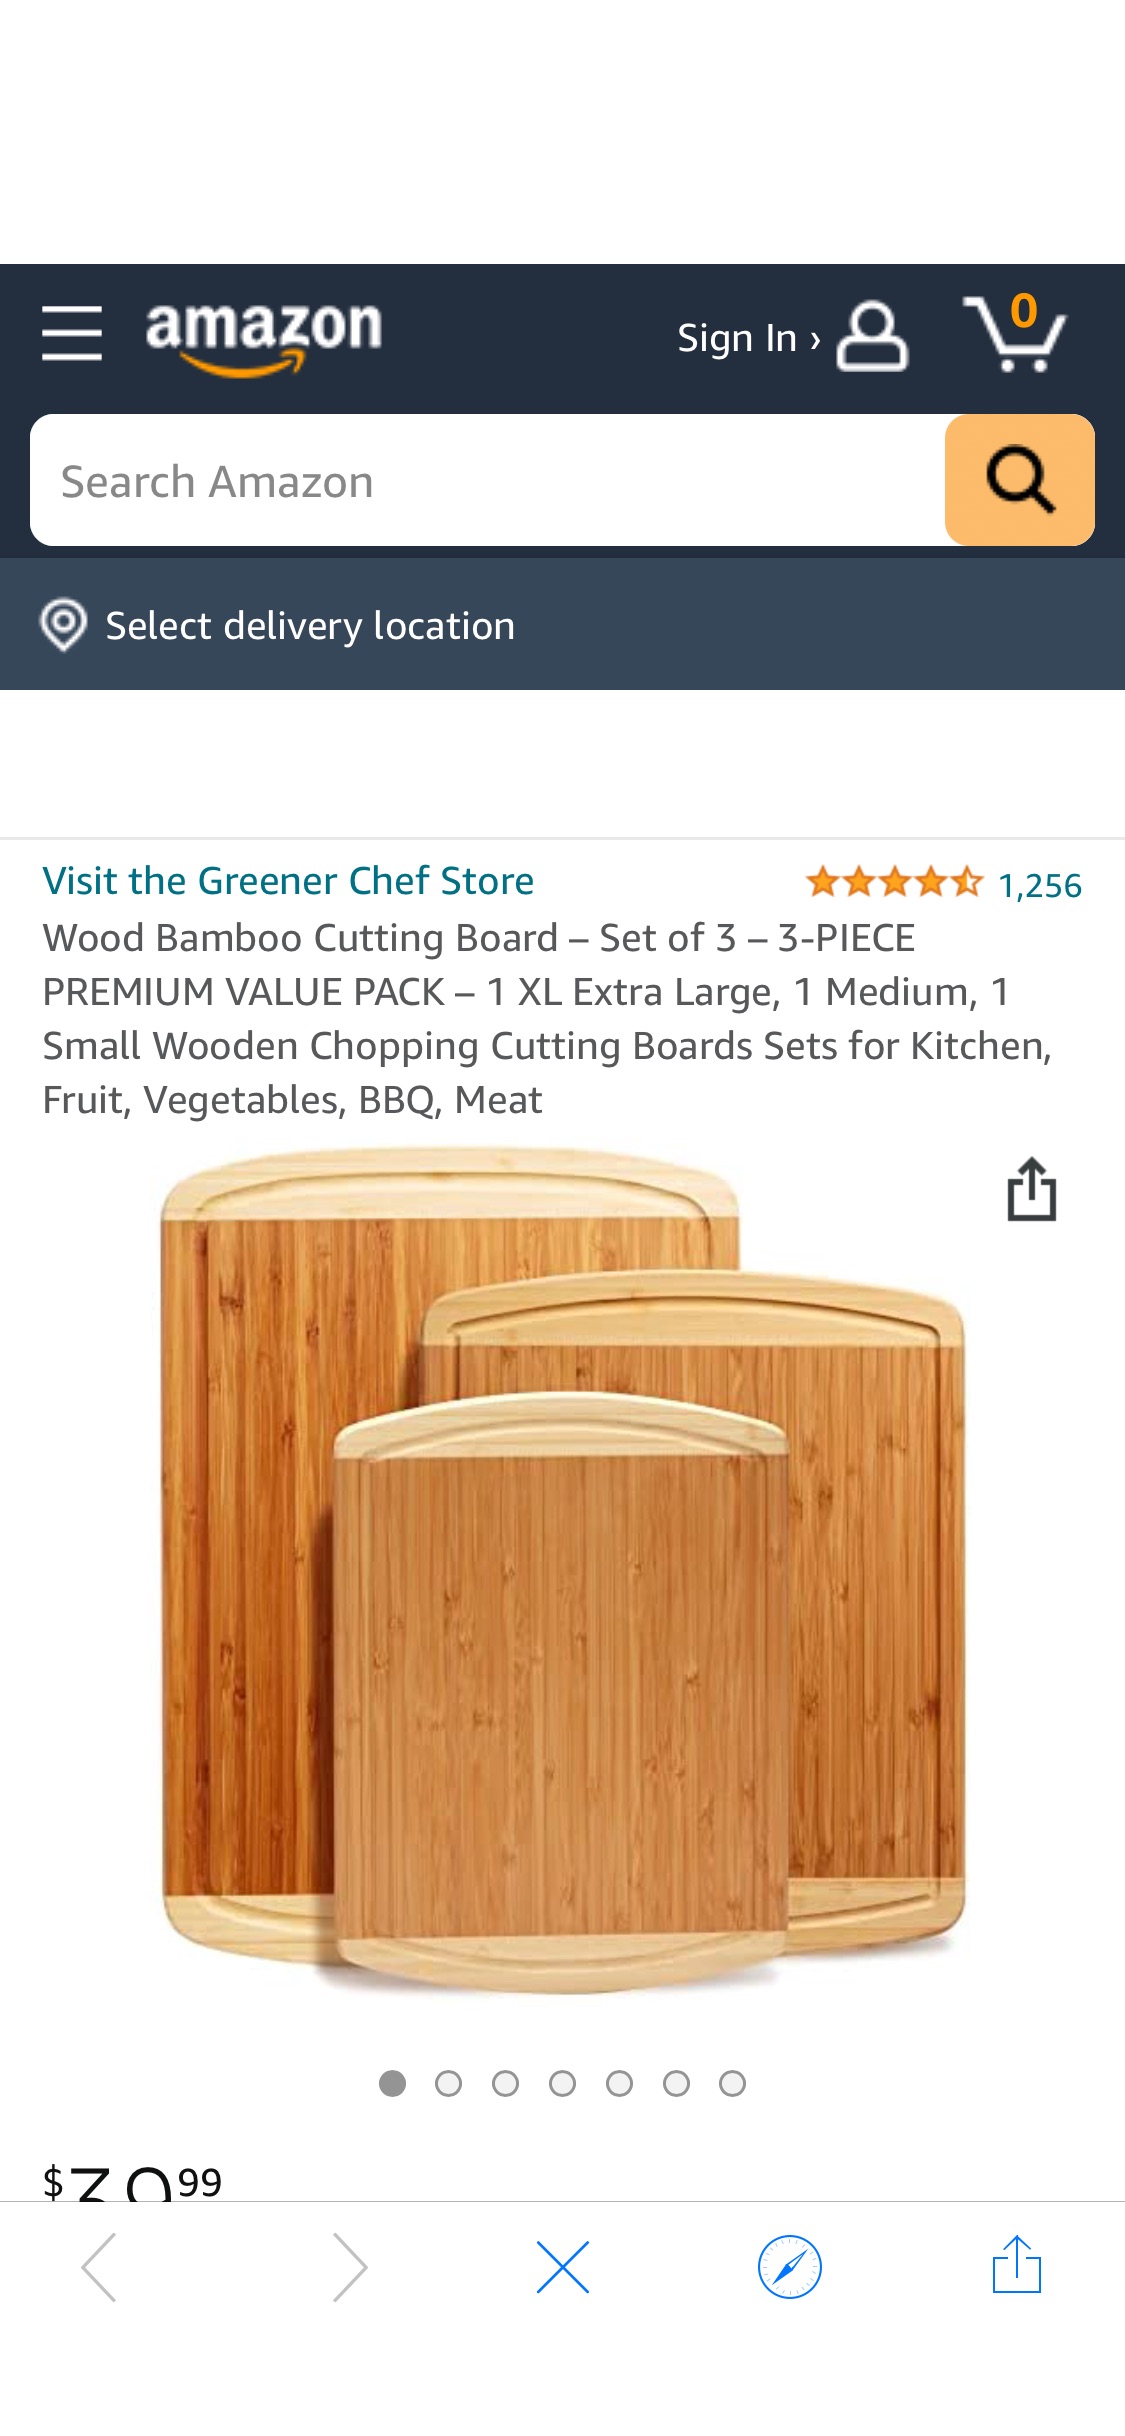 Amazon.com: Wood Bamboo Cutting Board – Set of 3 – 3-PIECE PREMIUM VALUE PACK – 1 XL Extra Large, 1 Medium, 1 Small Wooden Chopping Cutting Boards Sets for Kitchen, Fruit, Vegetables, BBQ, Mea菜板套装